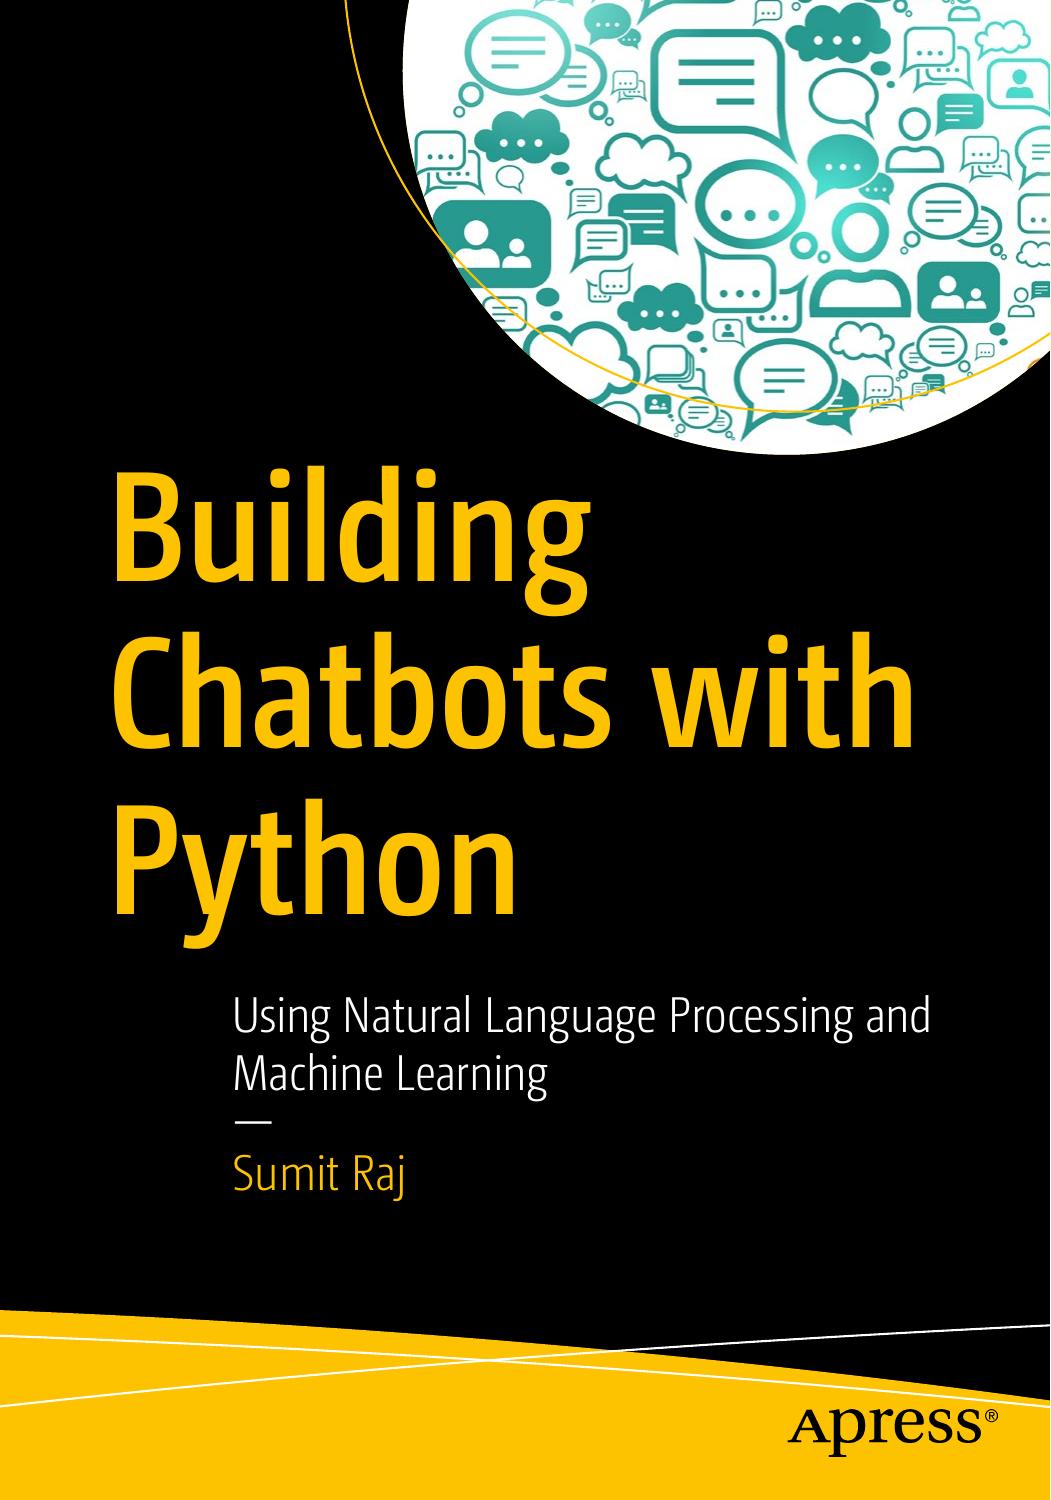 Building Chatbots with Python: using Natural Language Processing and Machine Learning